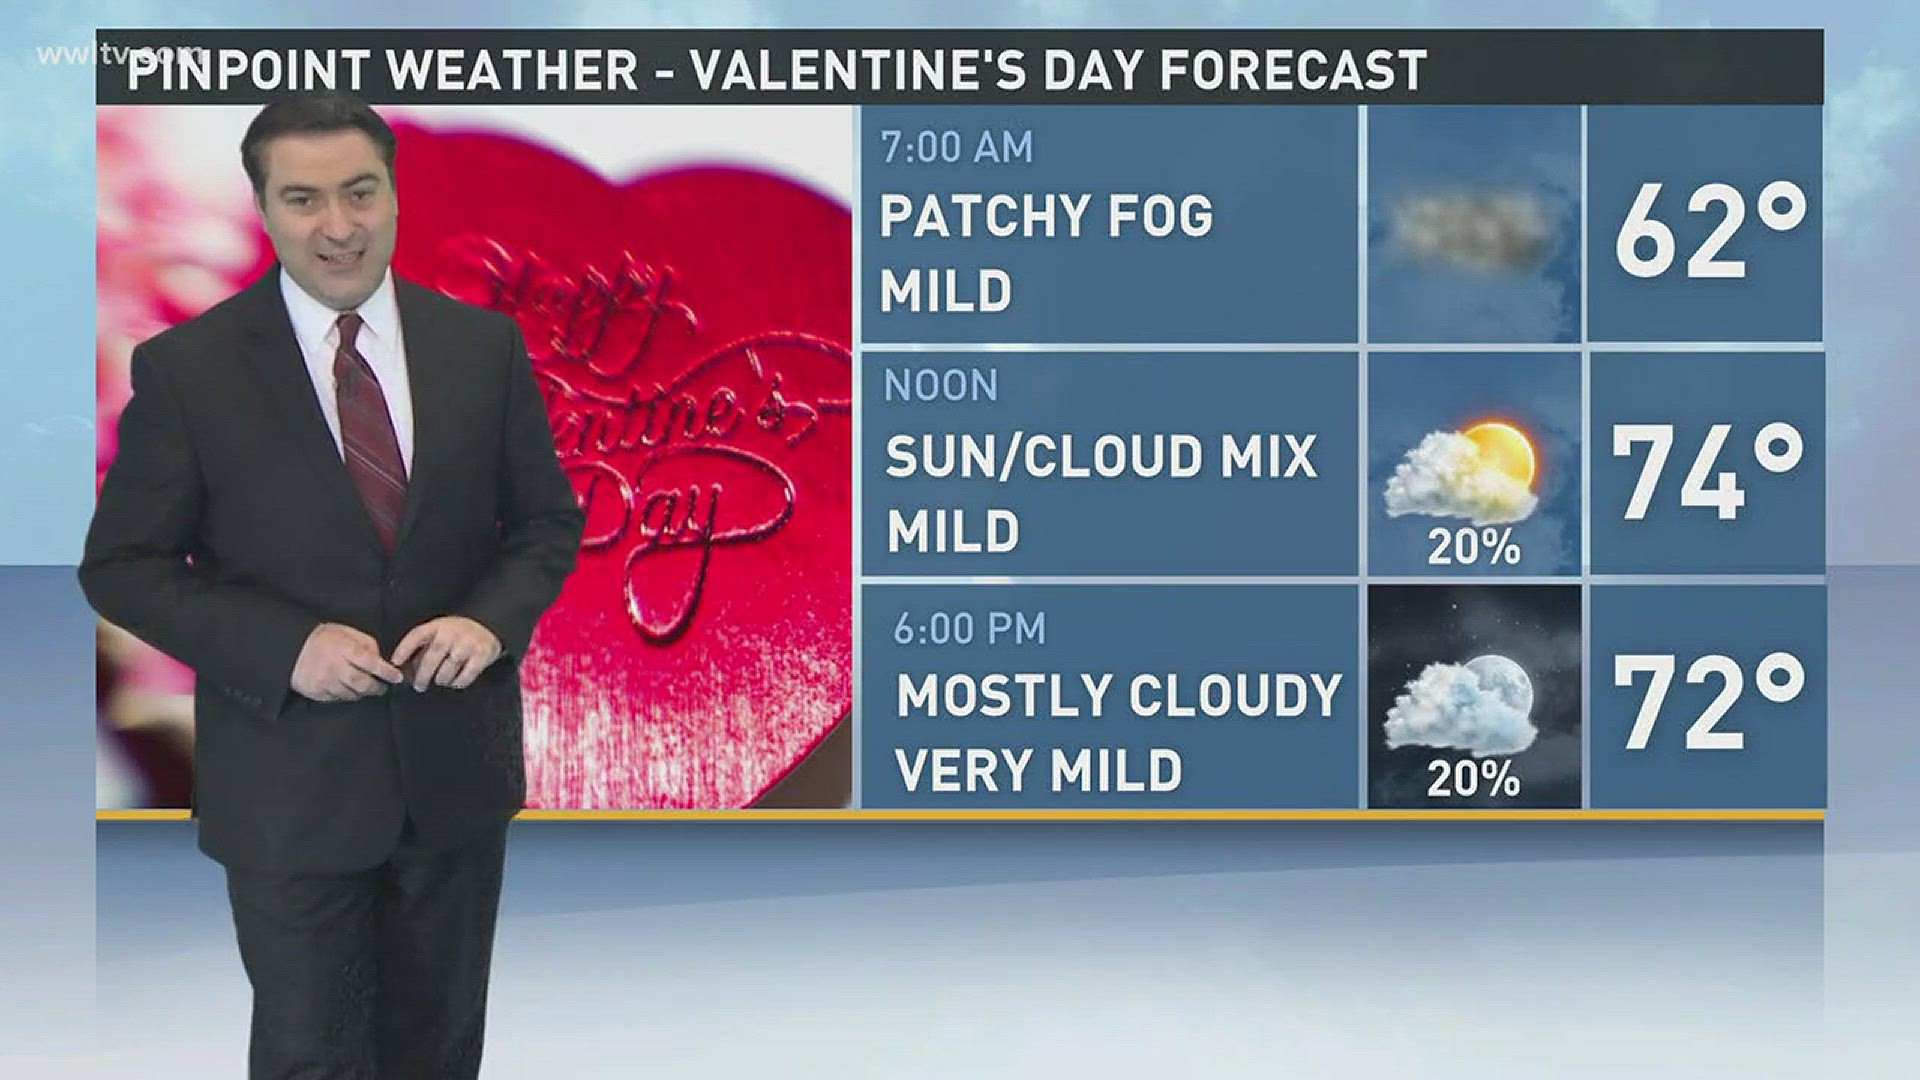 Meteorologist Dave Nussbaum says it will be very mild with only a slight chance for rain today.